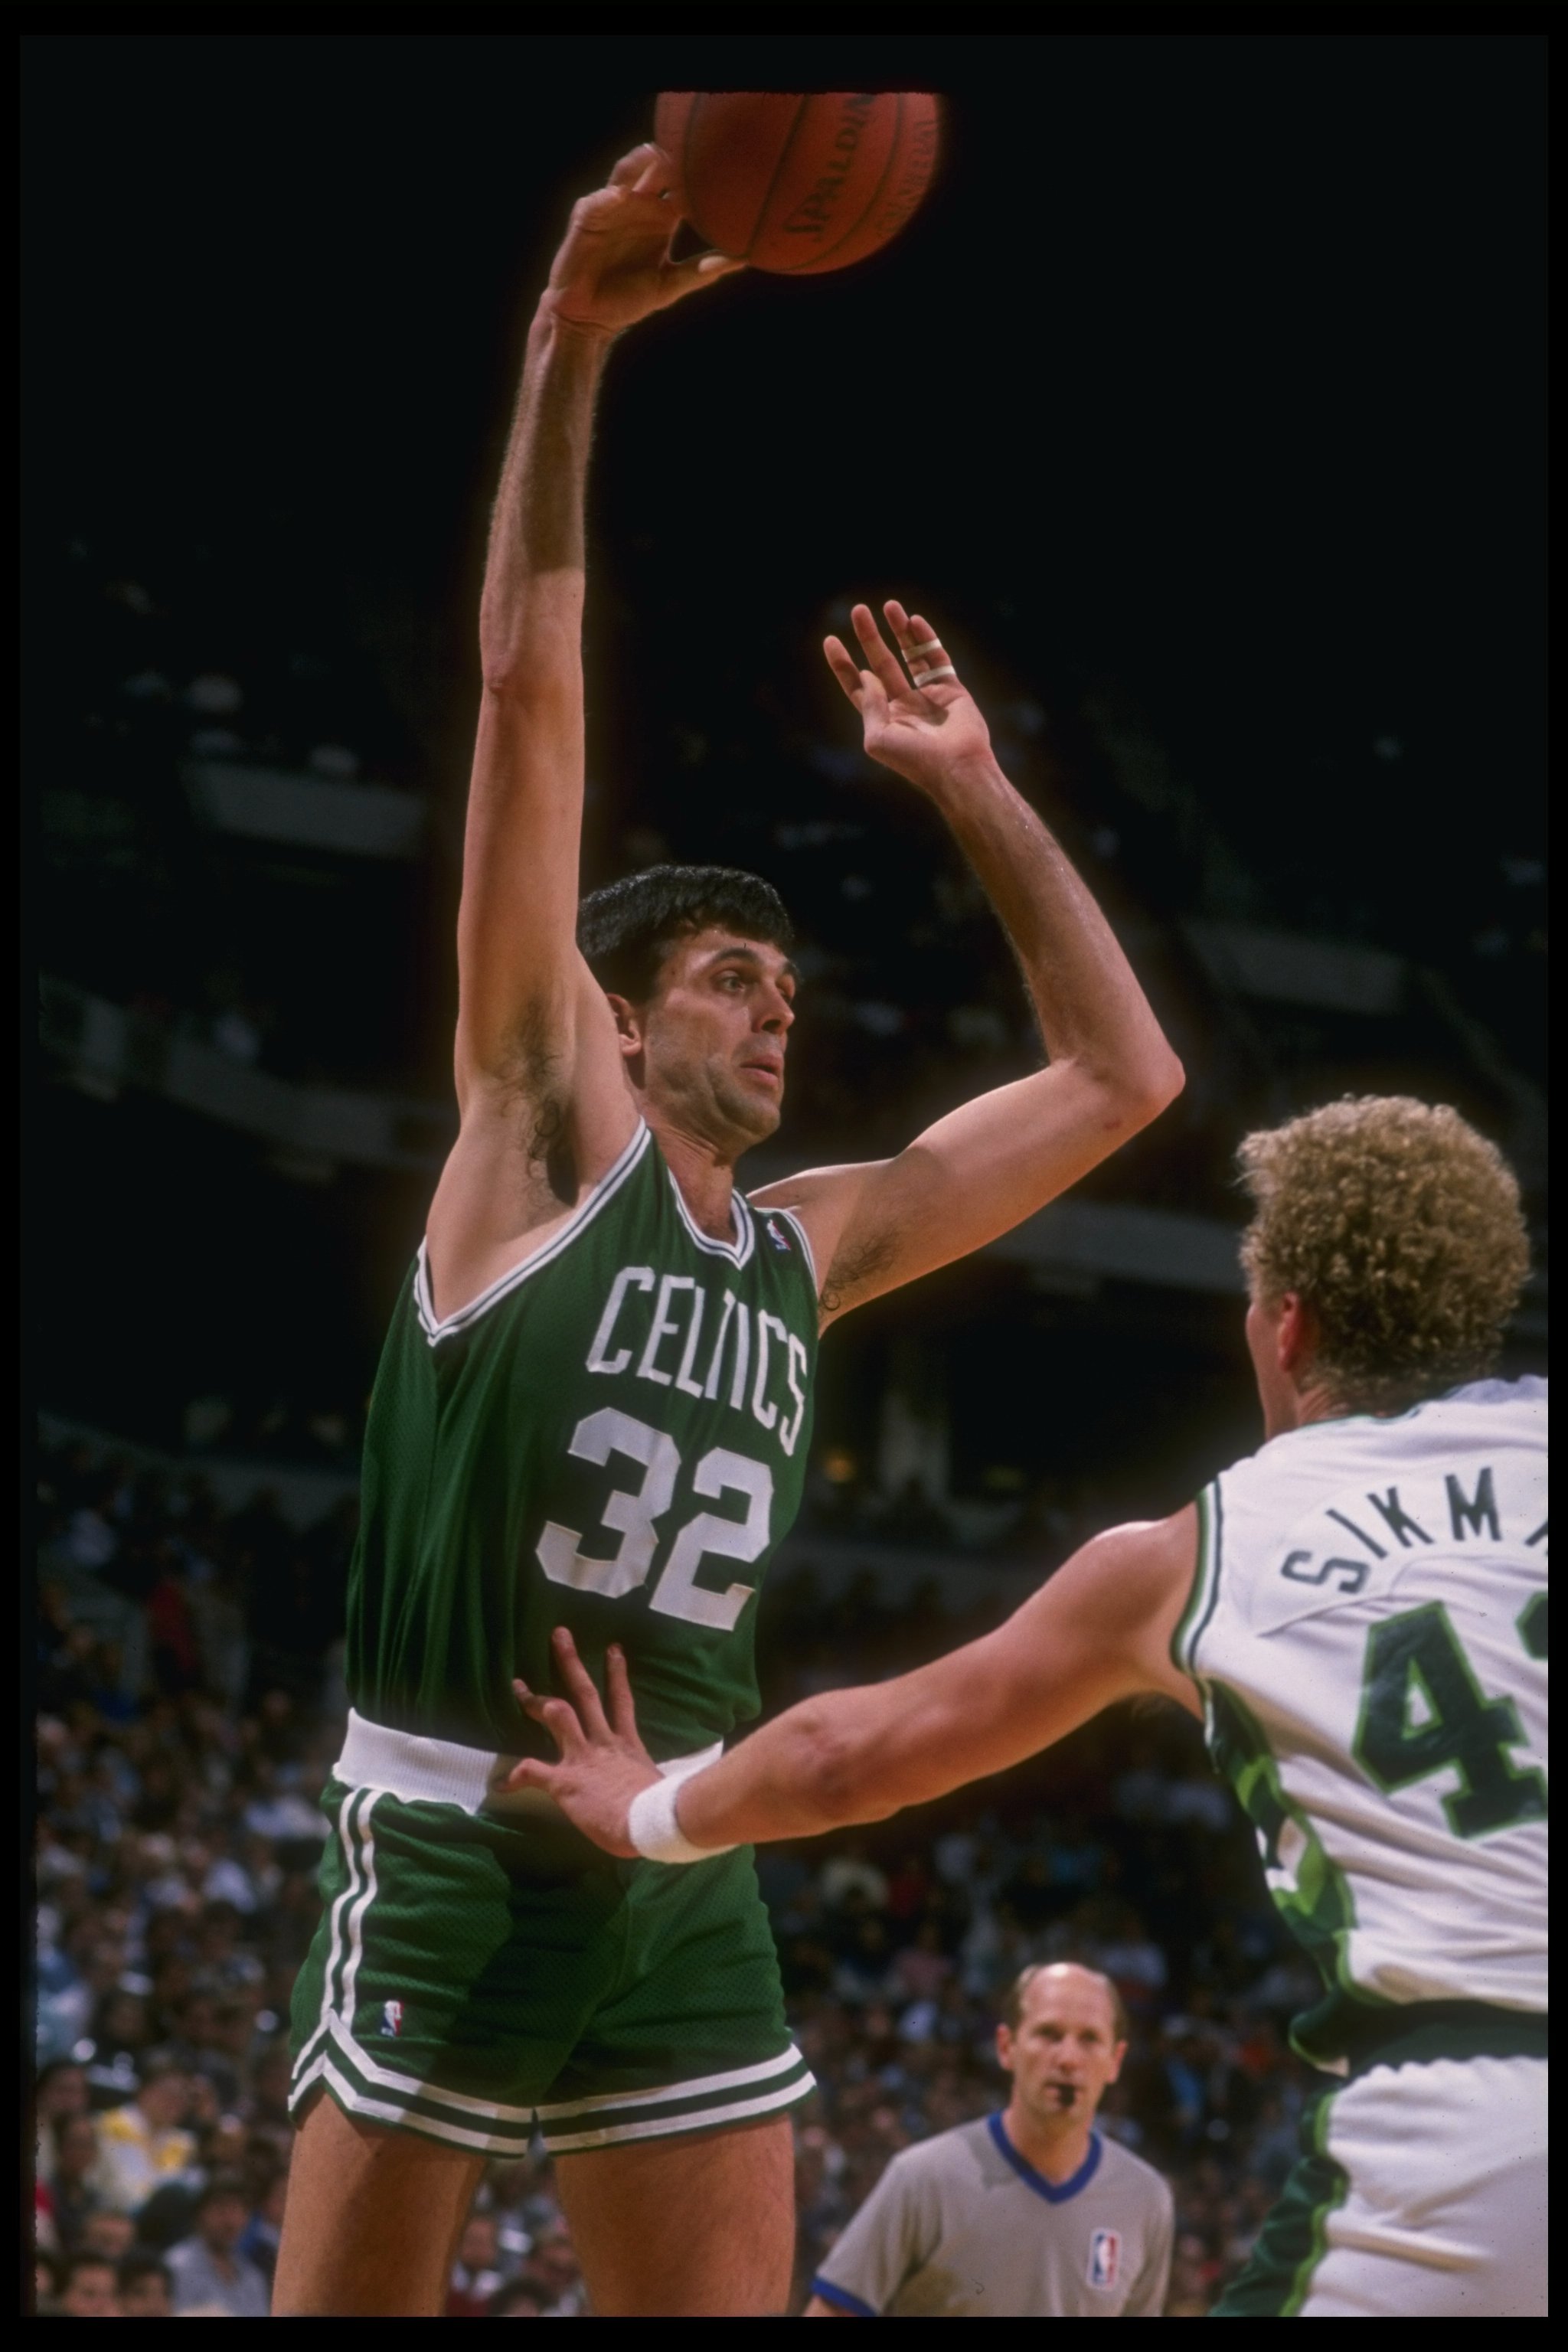 Ranking the Best Boston Celtics Players of All Time